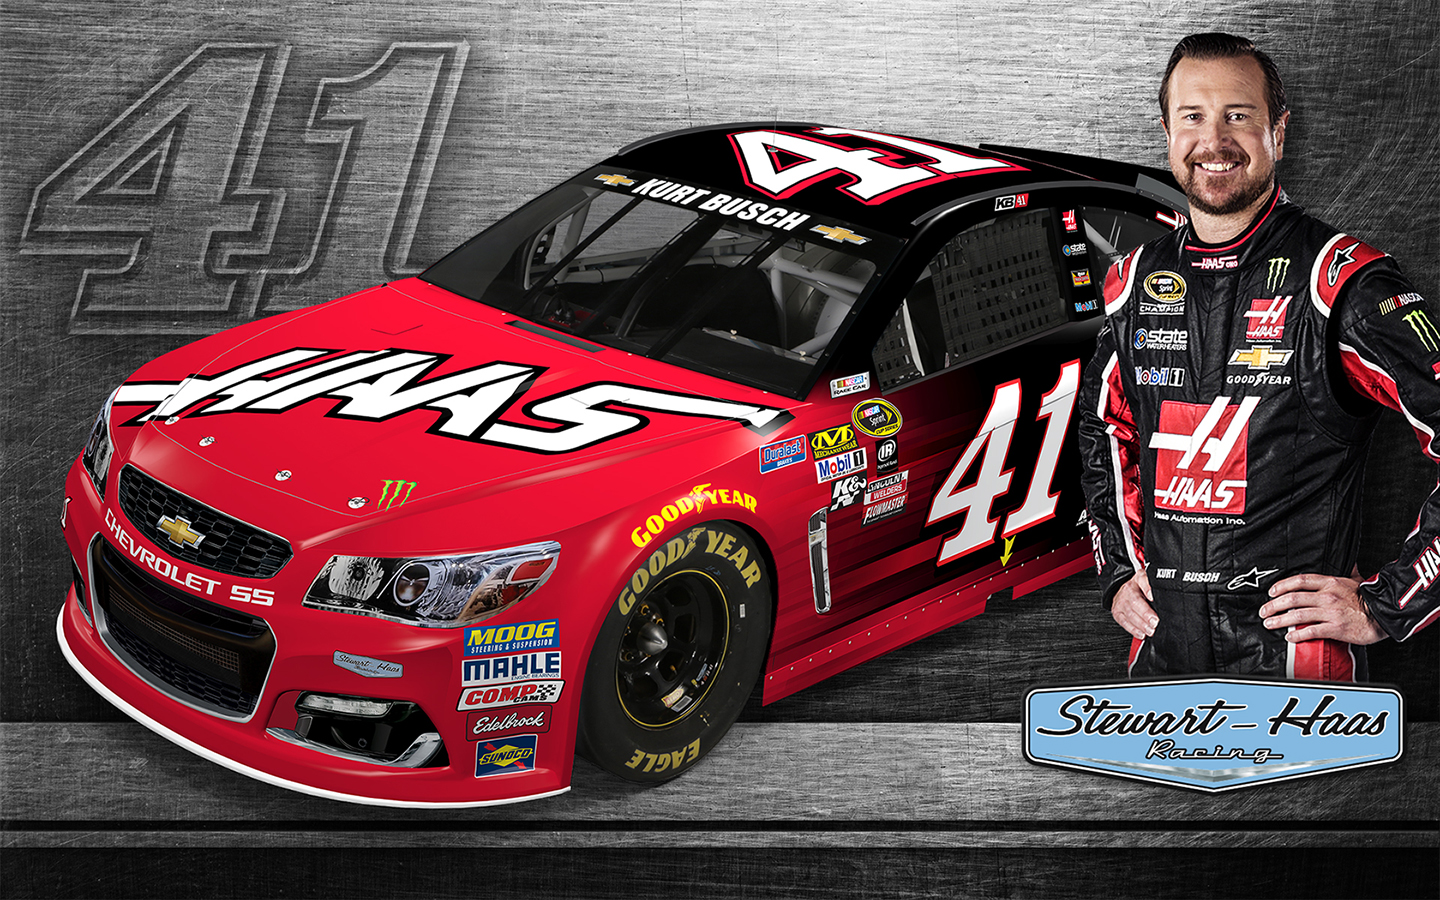 About Stewart Haas Racing Official Online Store